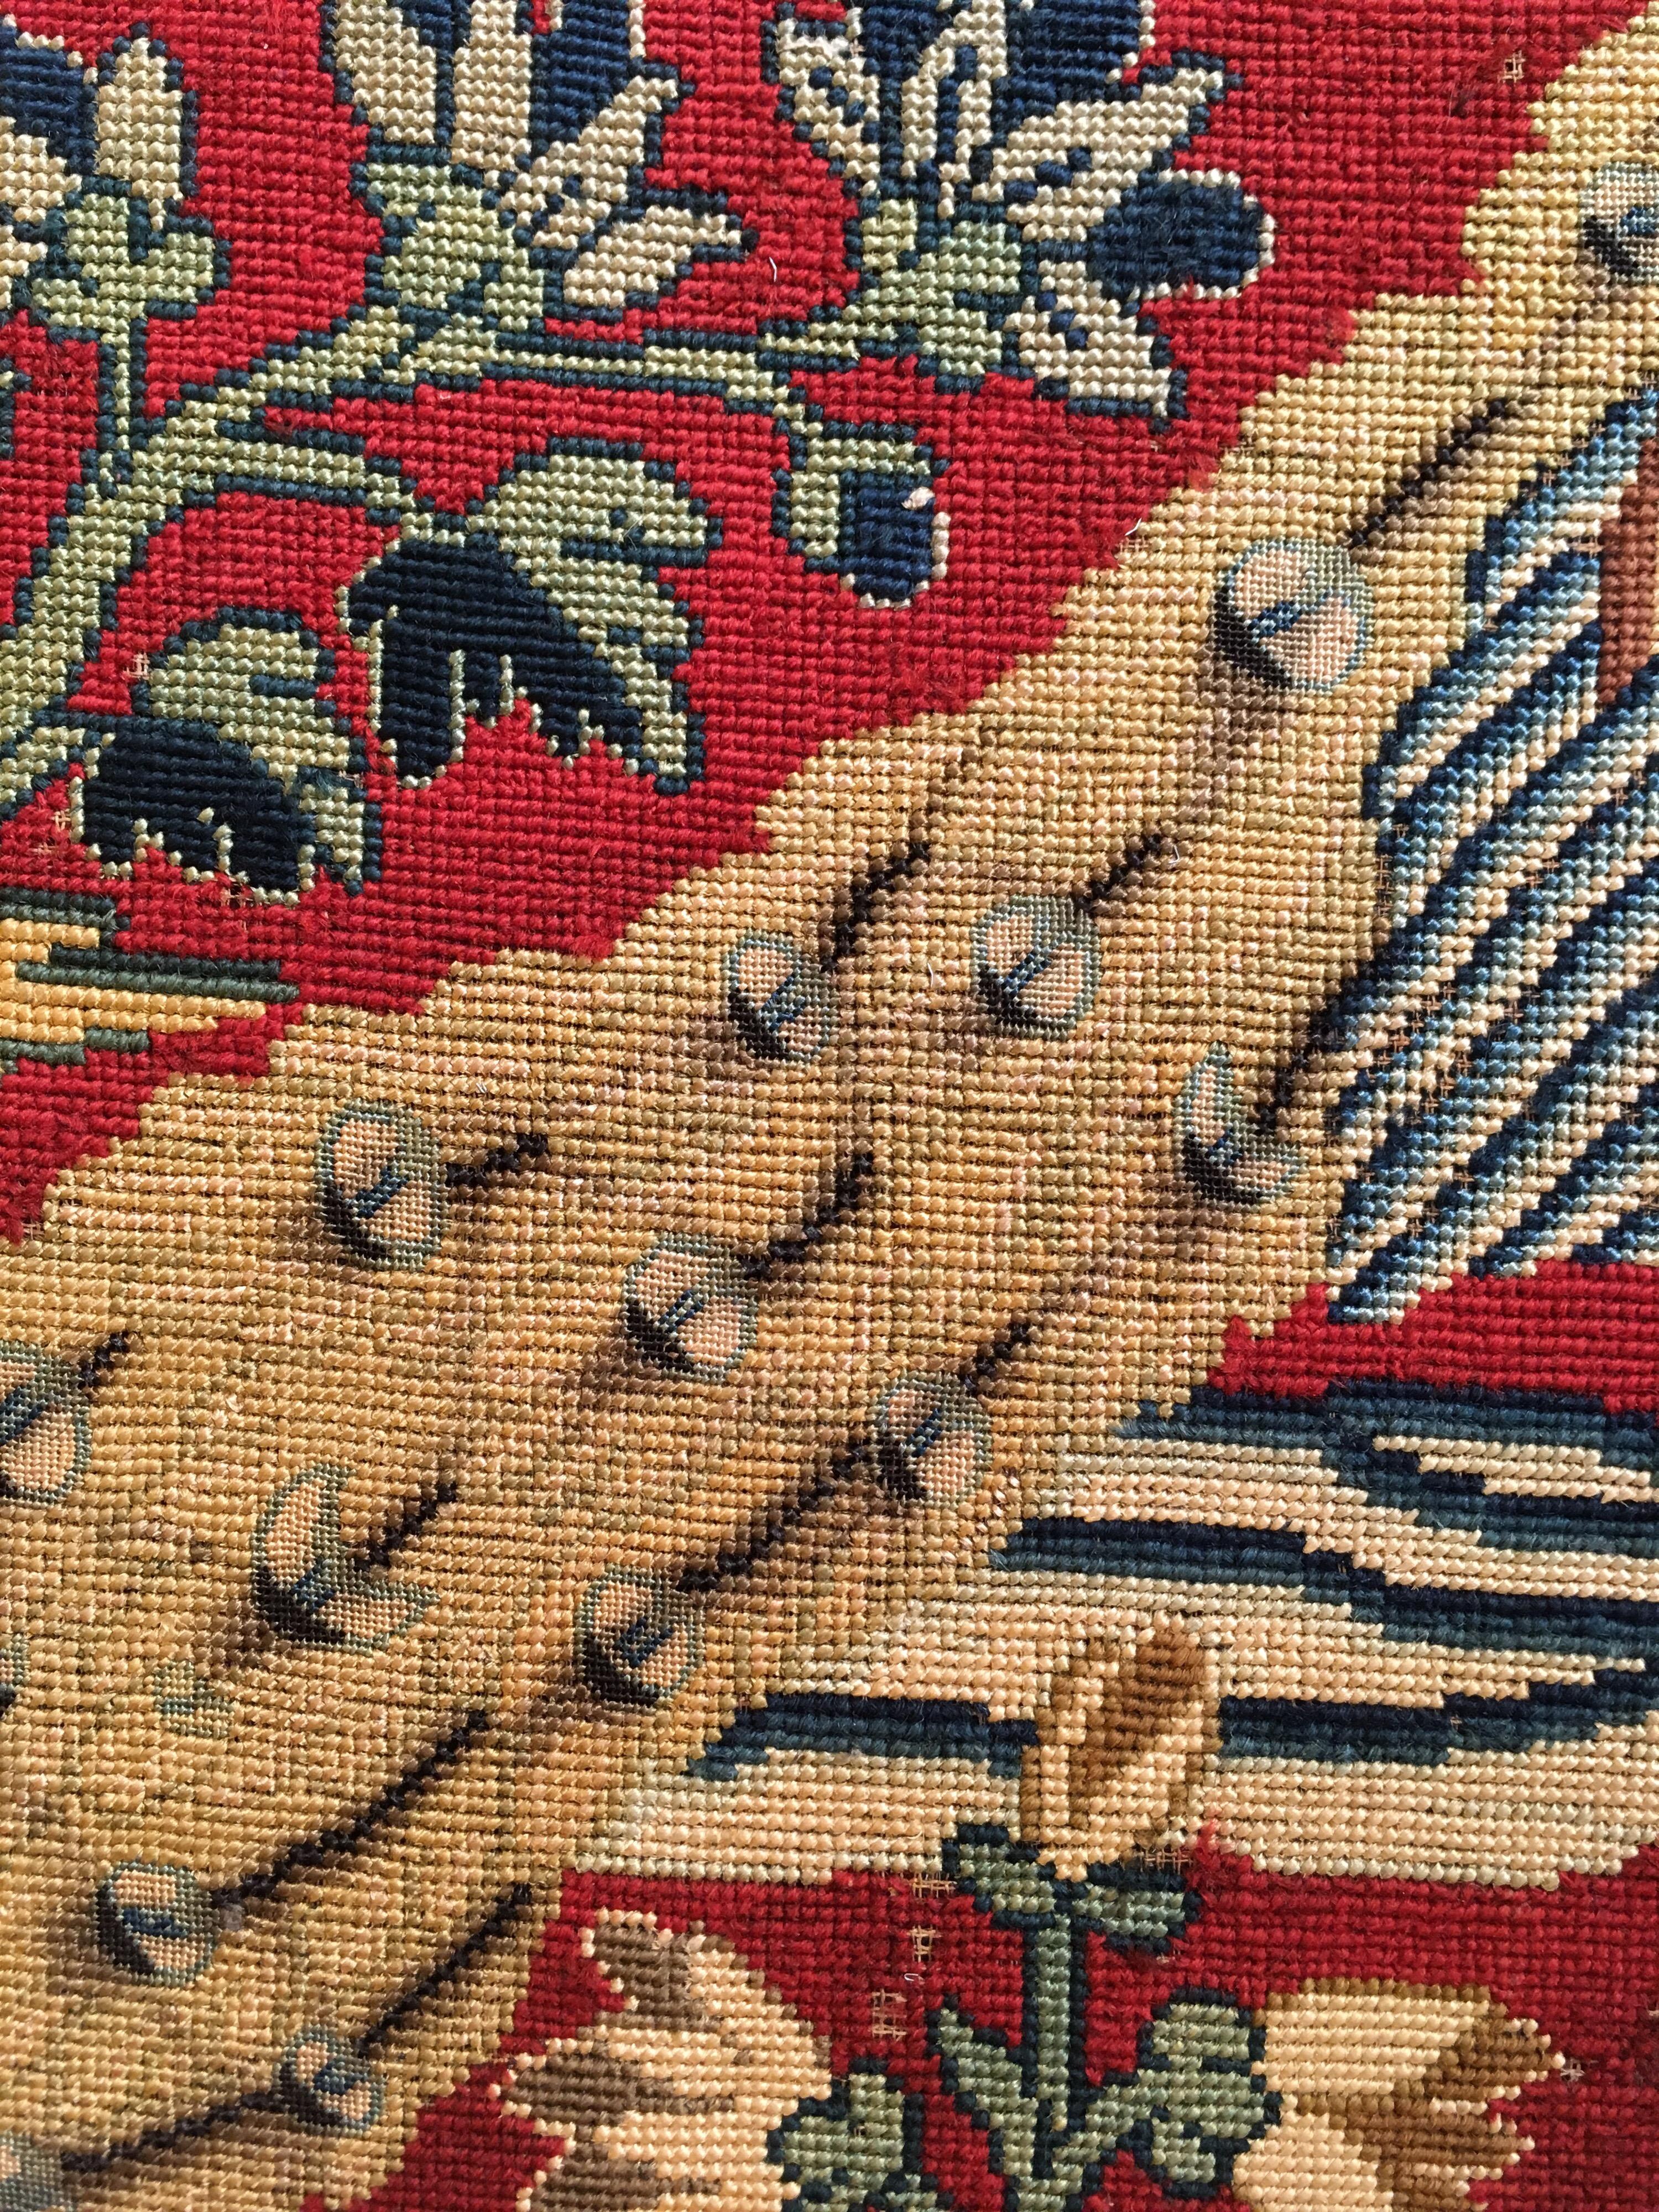 Embroidered Antique 18th Century French Tapestry Picture with Peacock and Parrot on Red